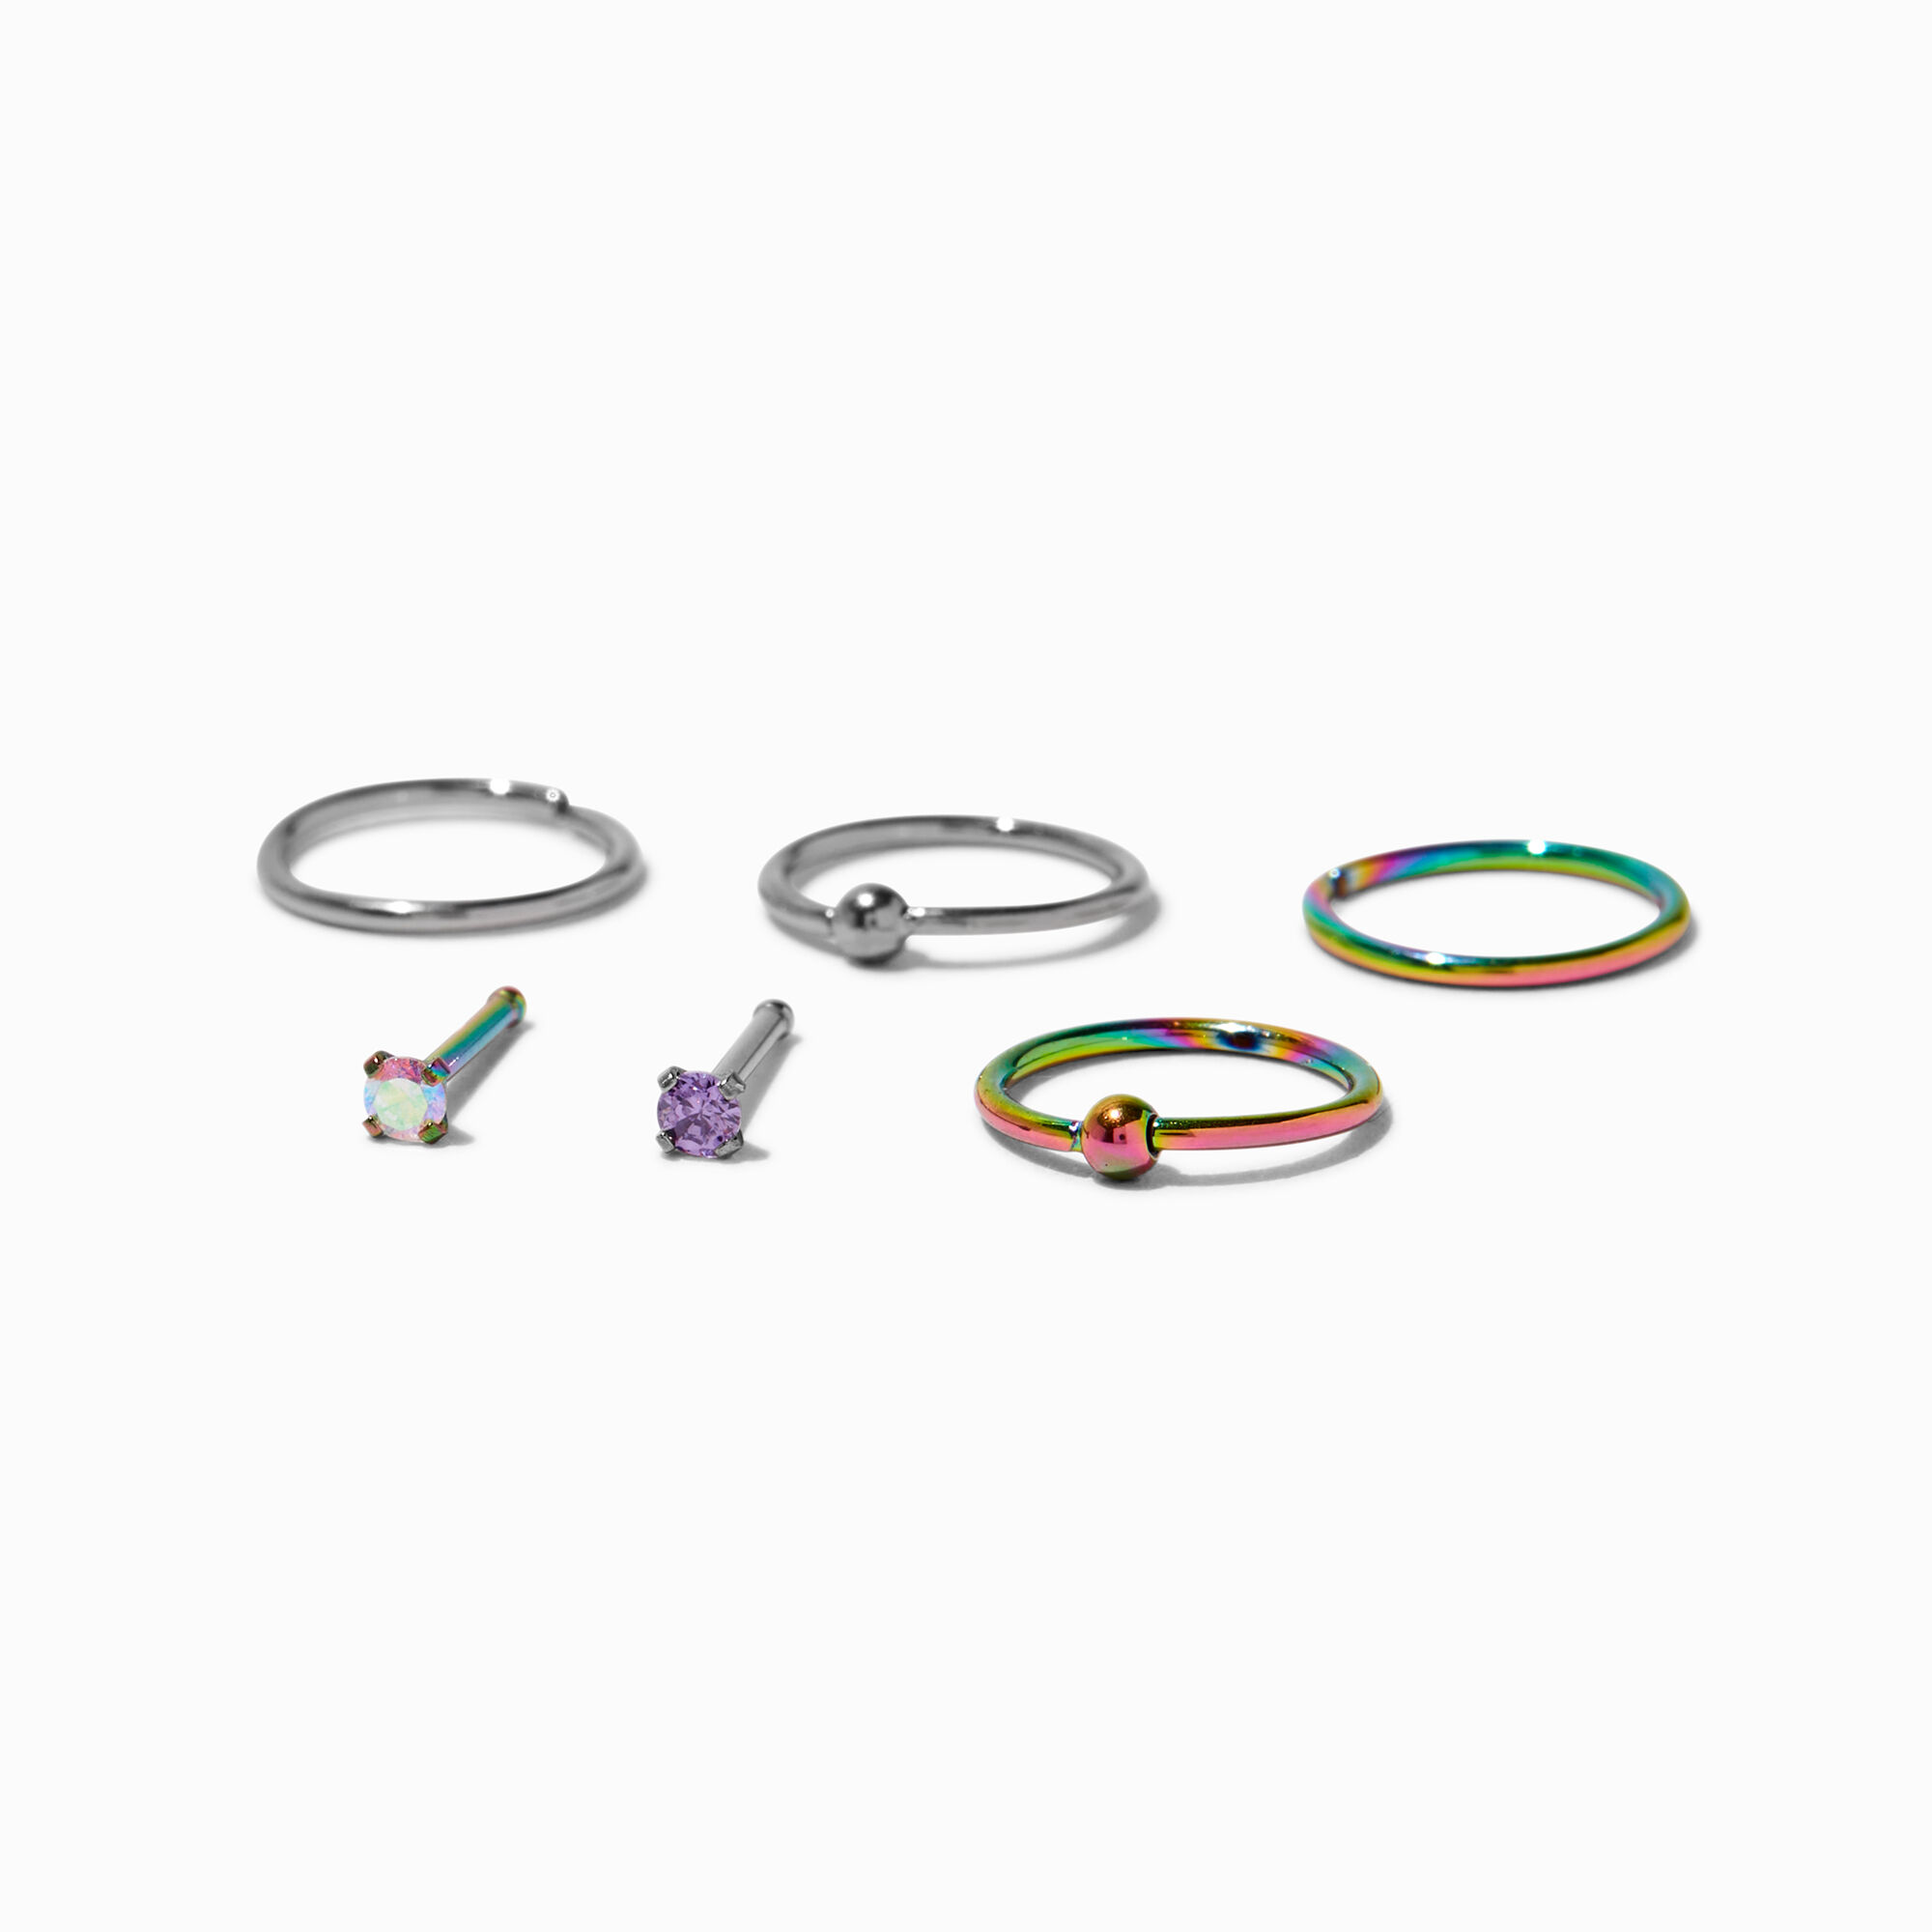 View Claires Anodized Titanium 20G Mixed Nose Rings 6 Pack information